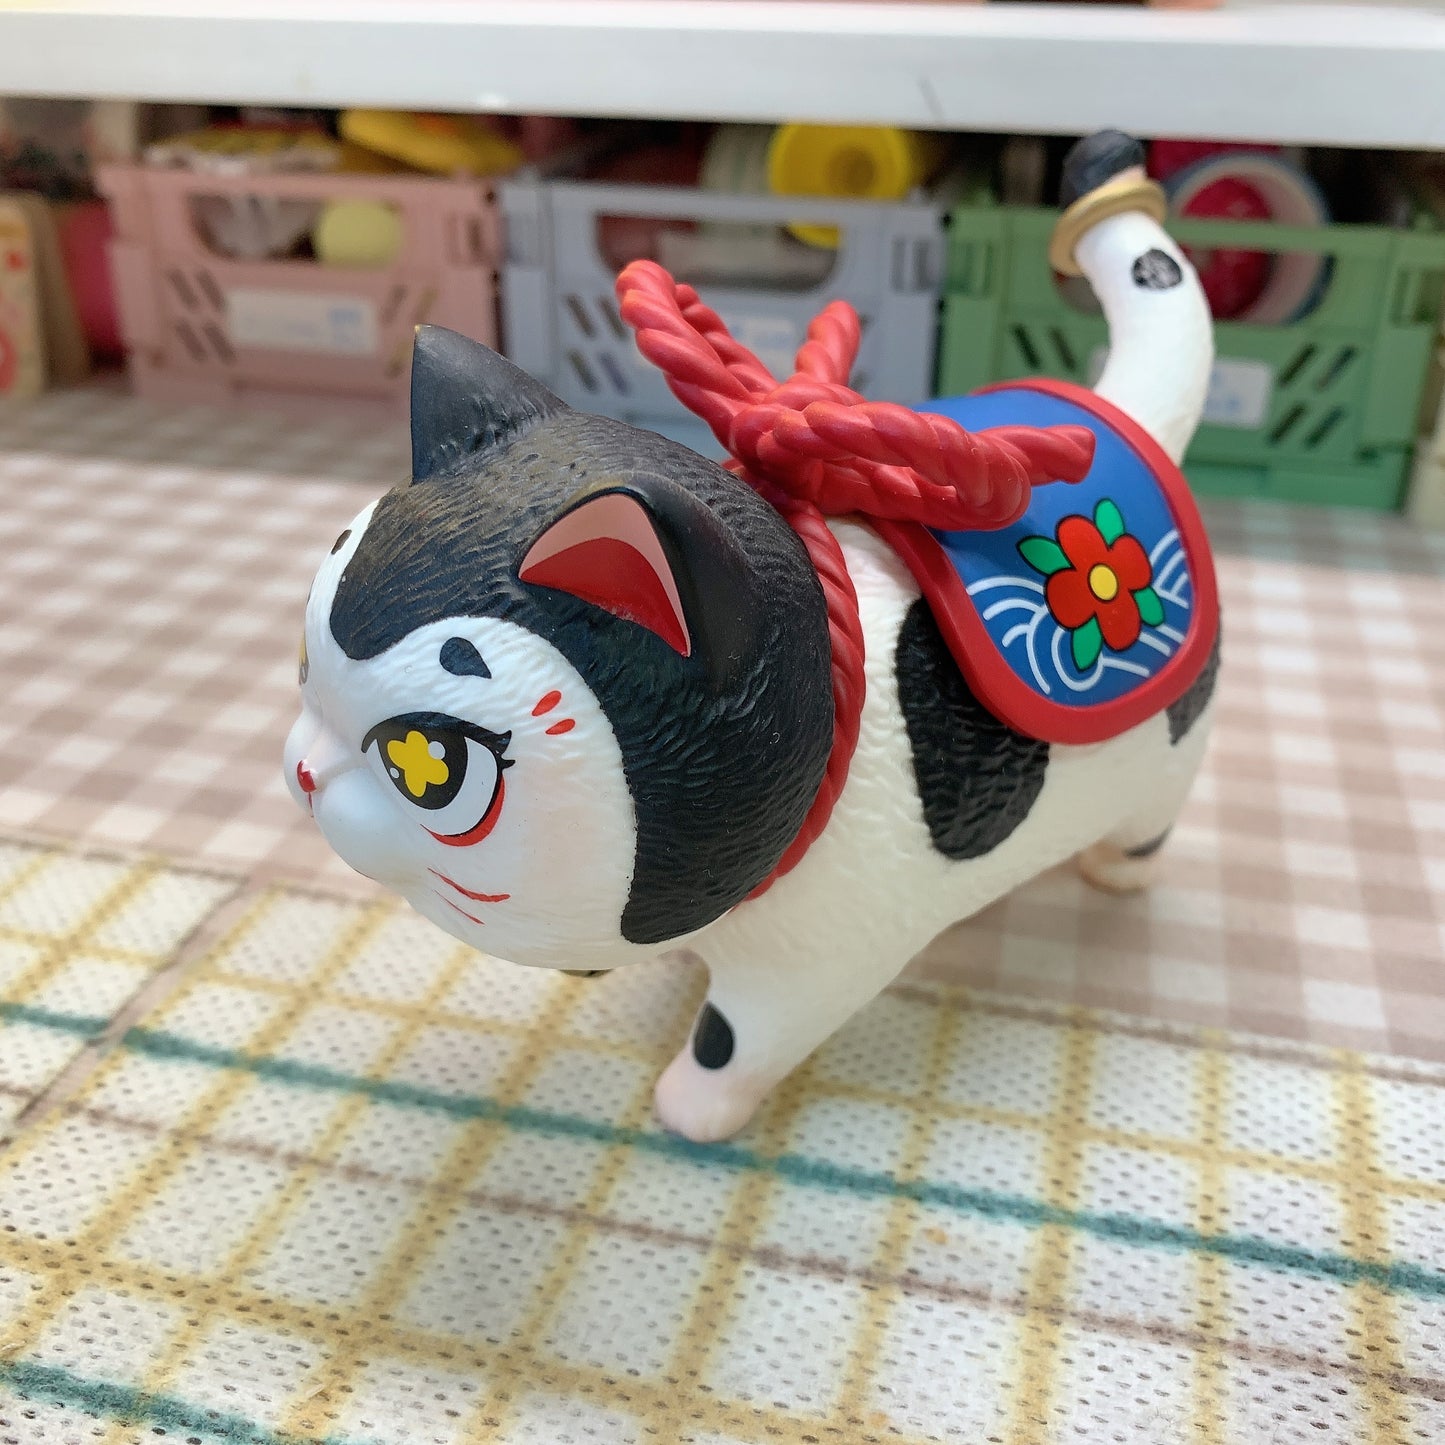 【PRELOVED and SALE 】Miao-Ling-Dang Collections blind box toy Japanese Inu-hariko cat